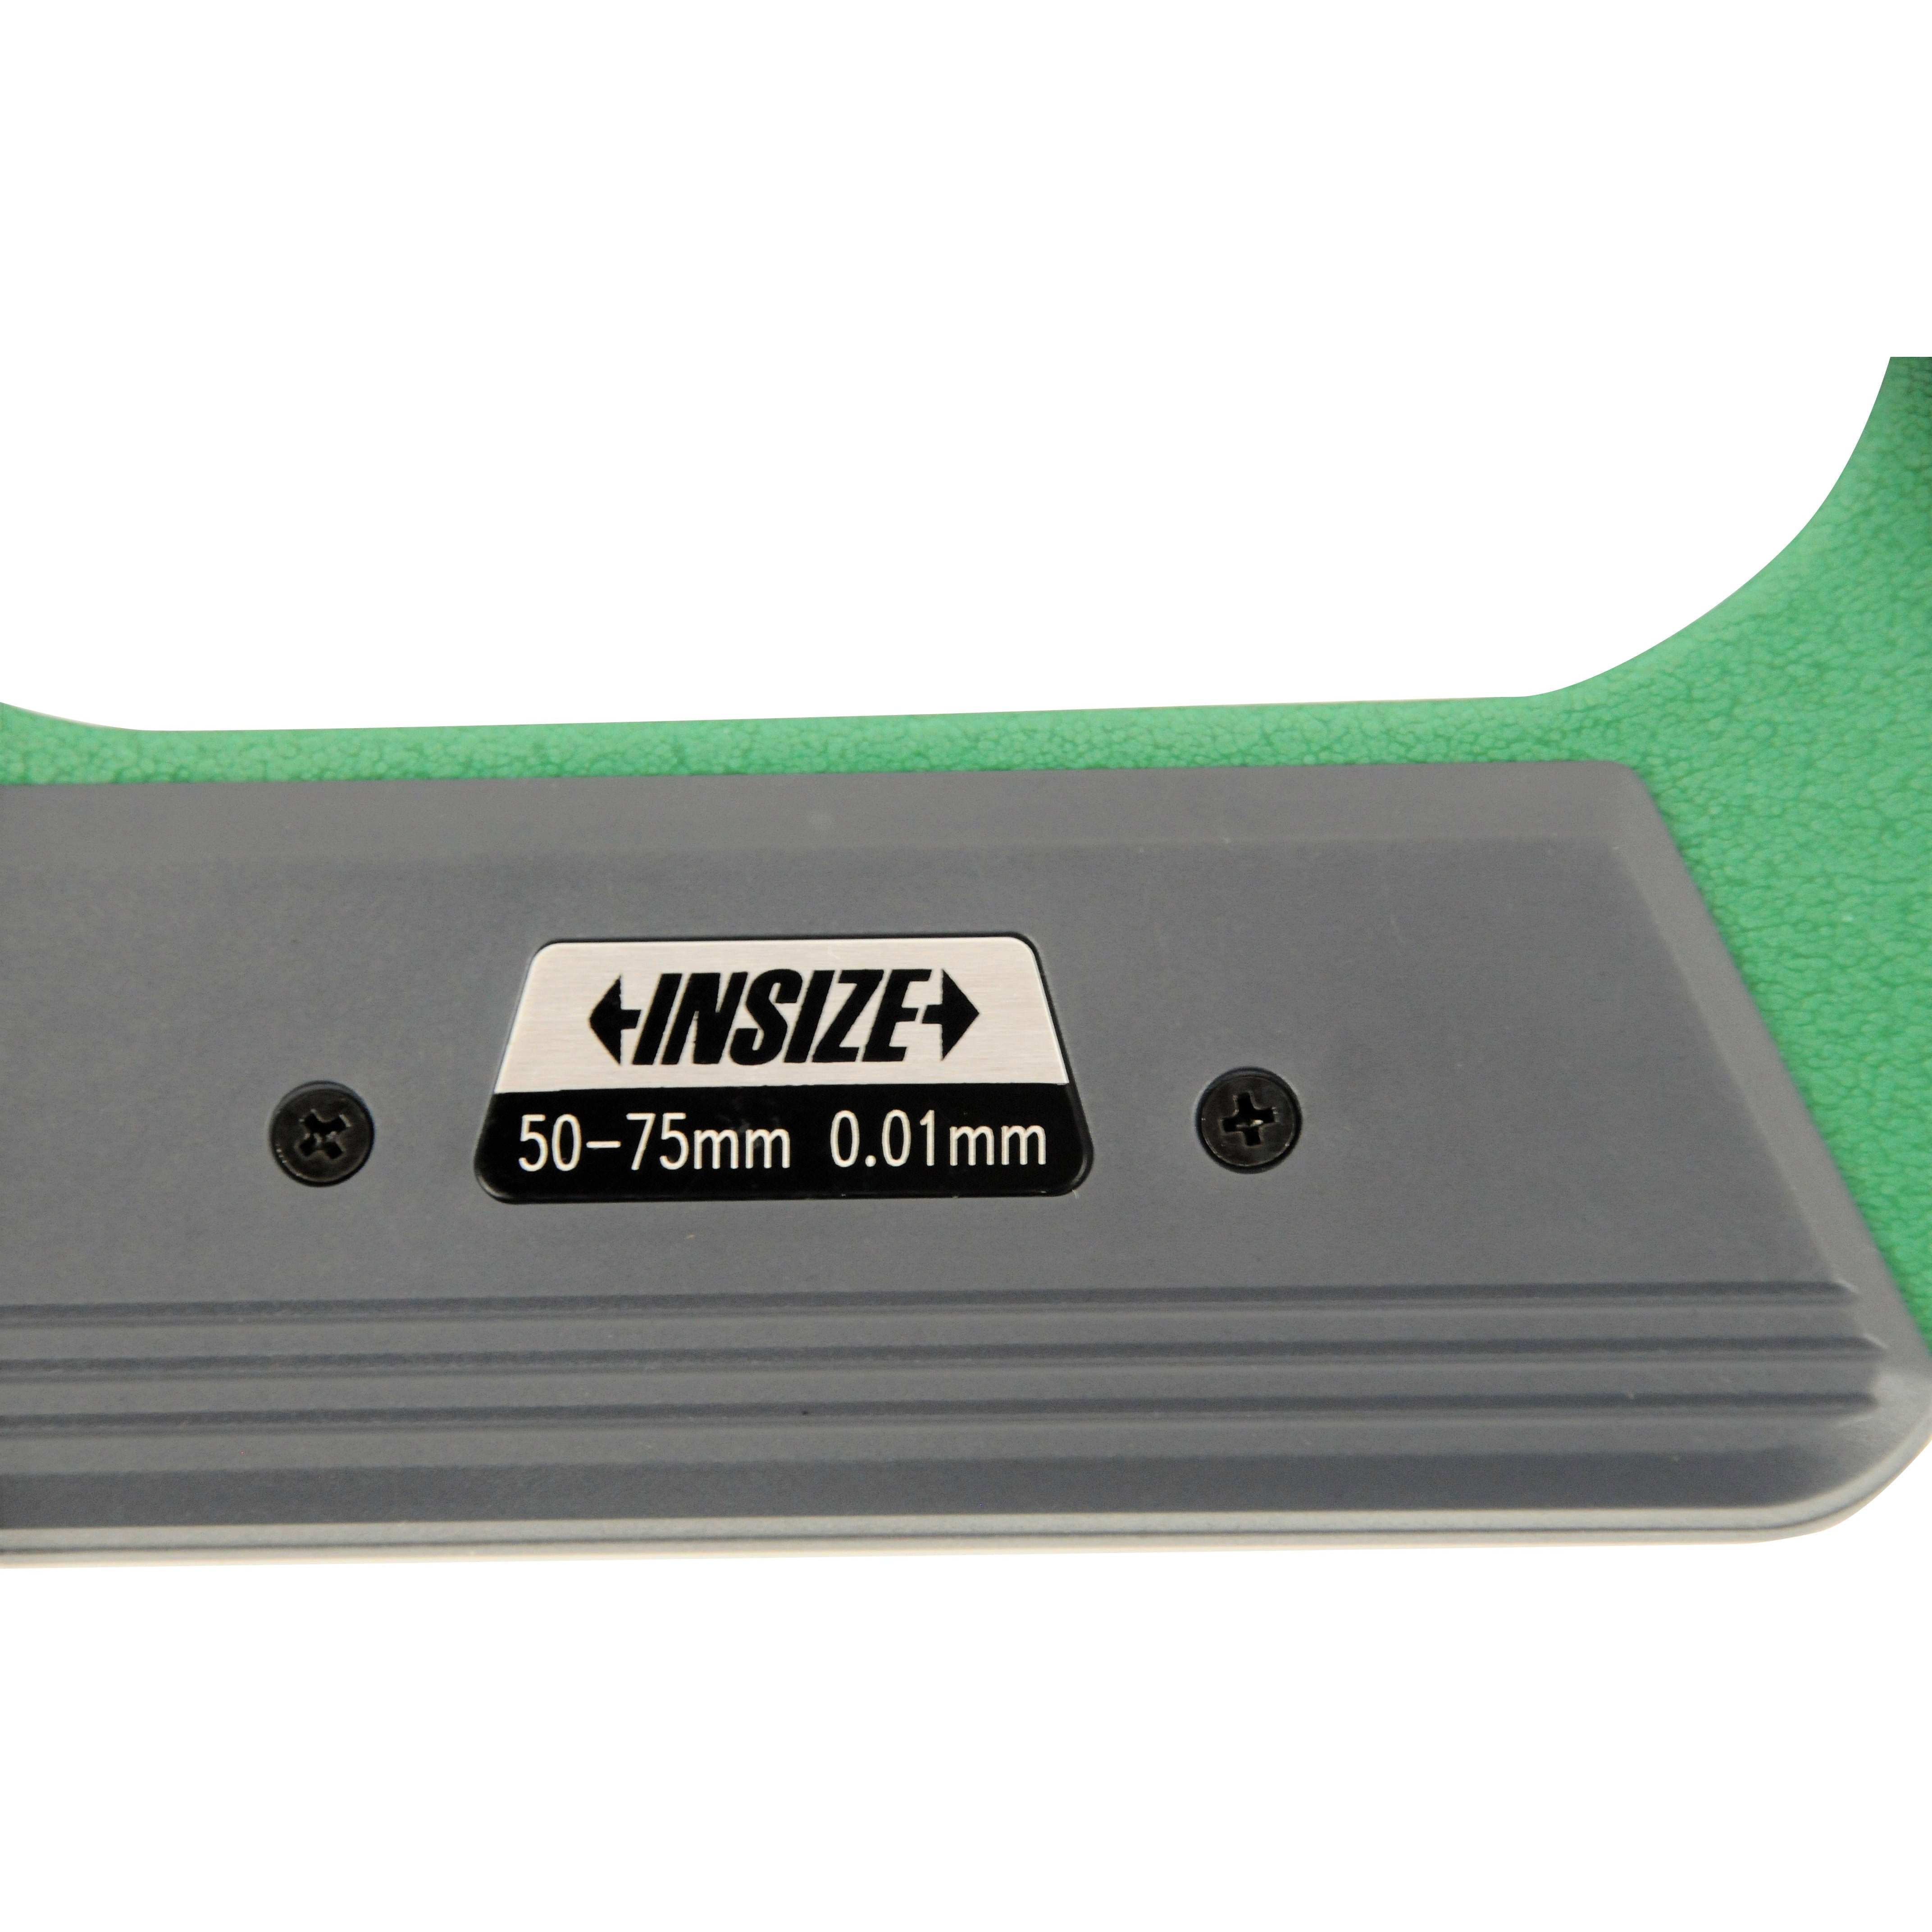 Insize Metric Outside Blade Micrometer 50-75mm Range Series 3232-75A